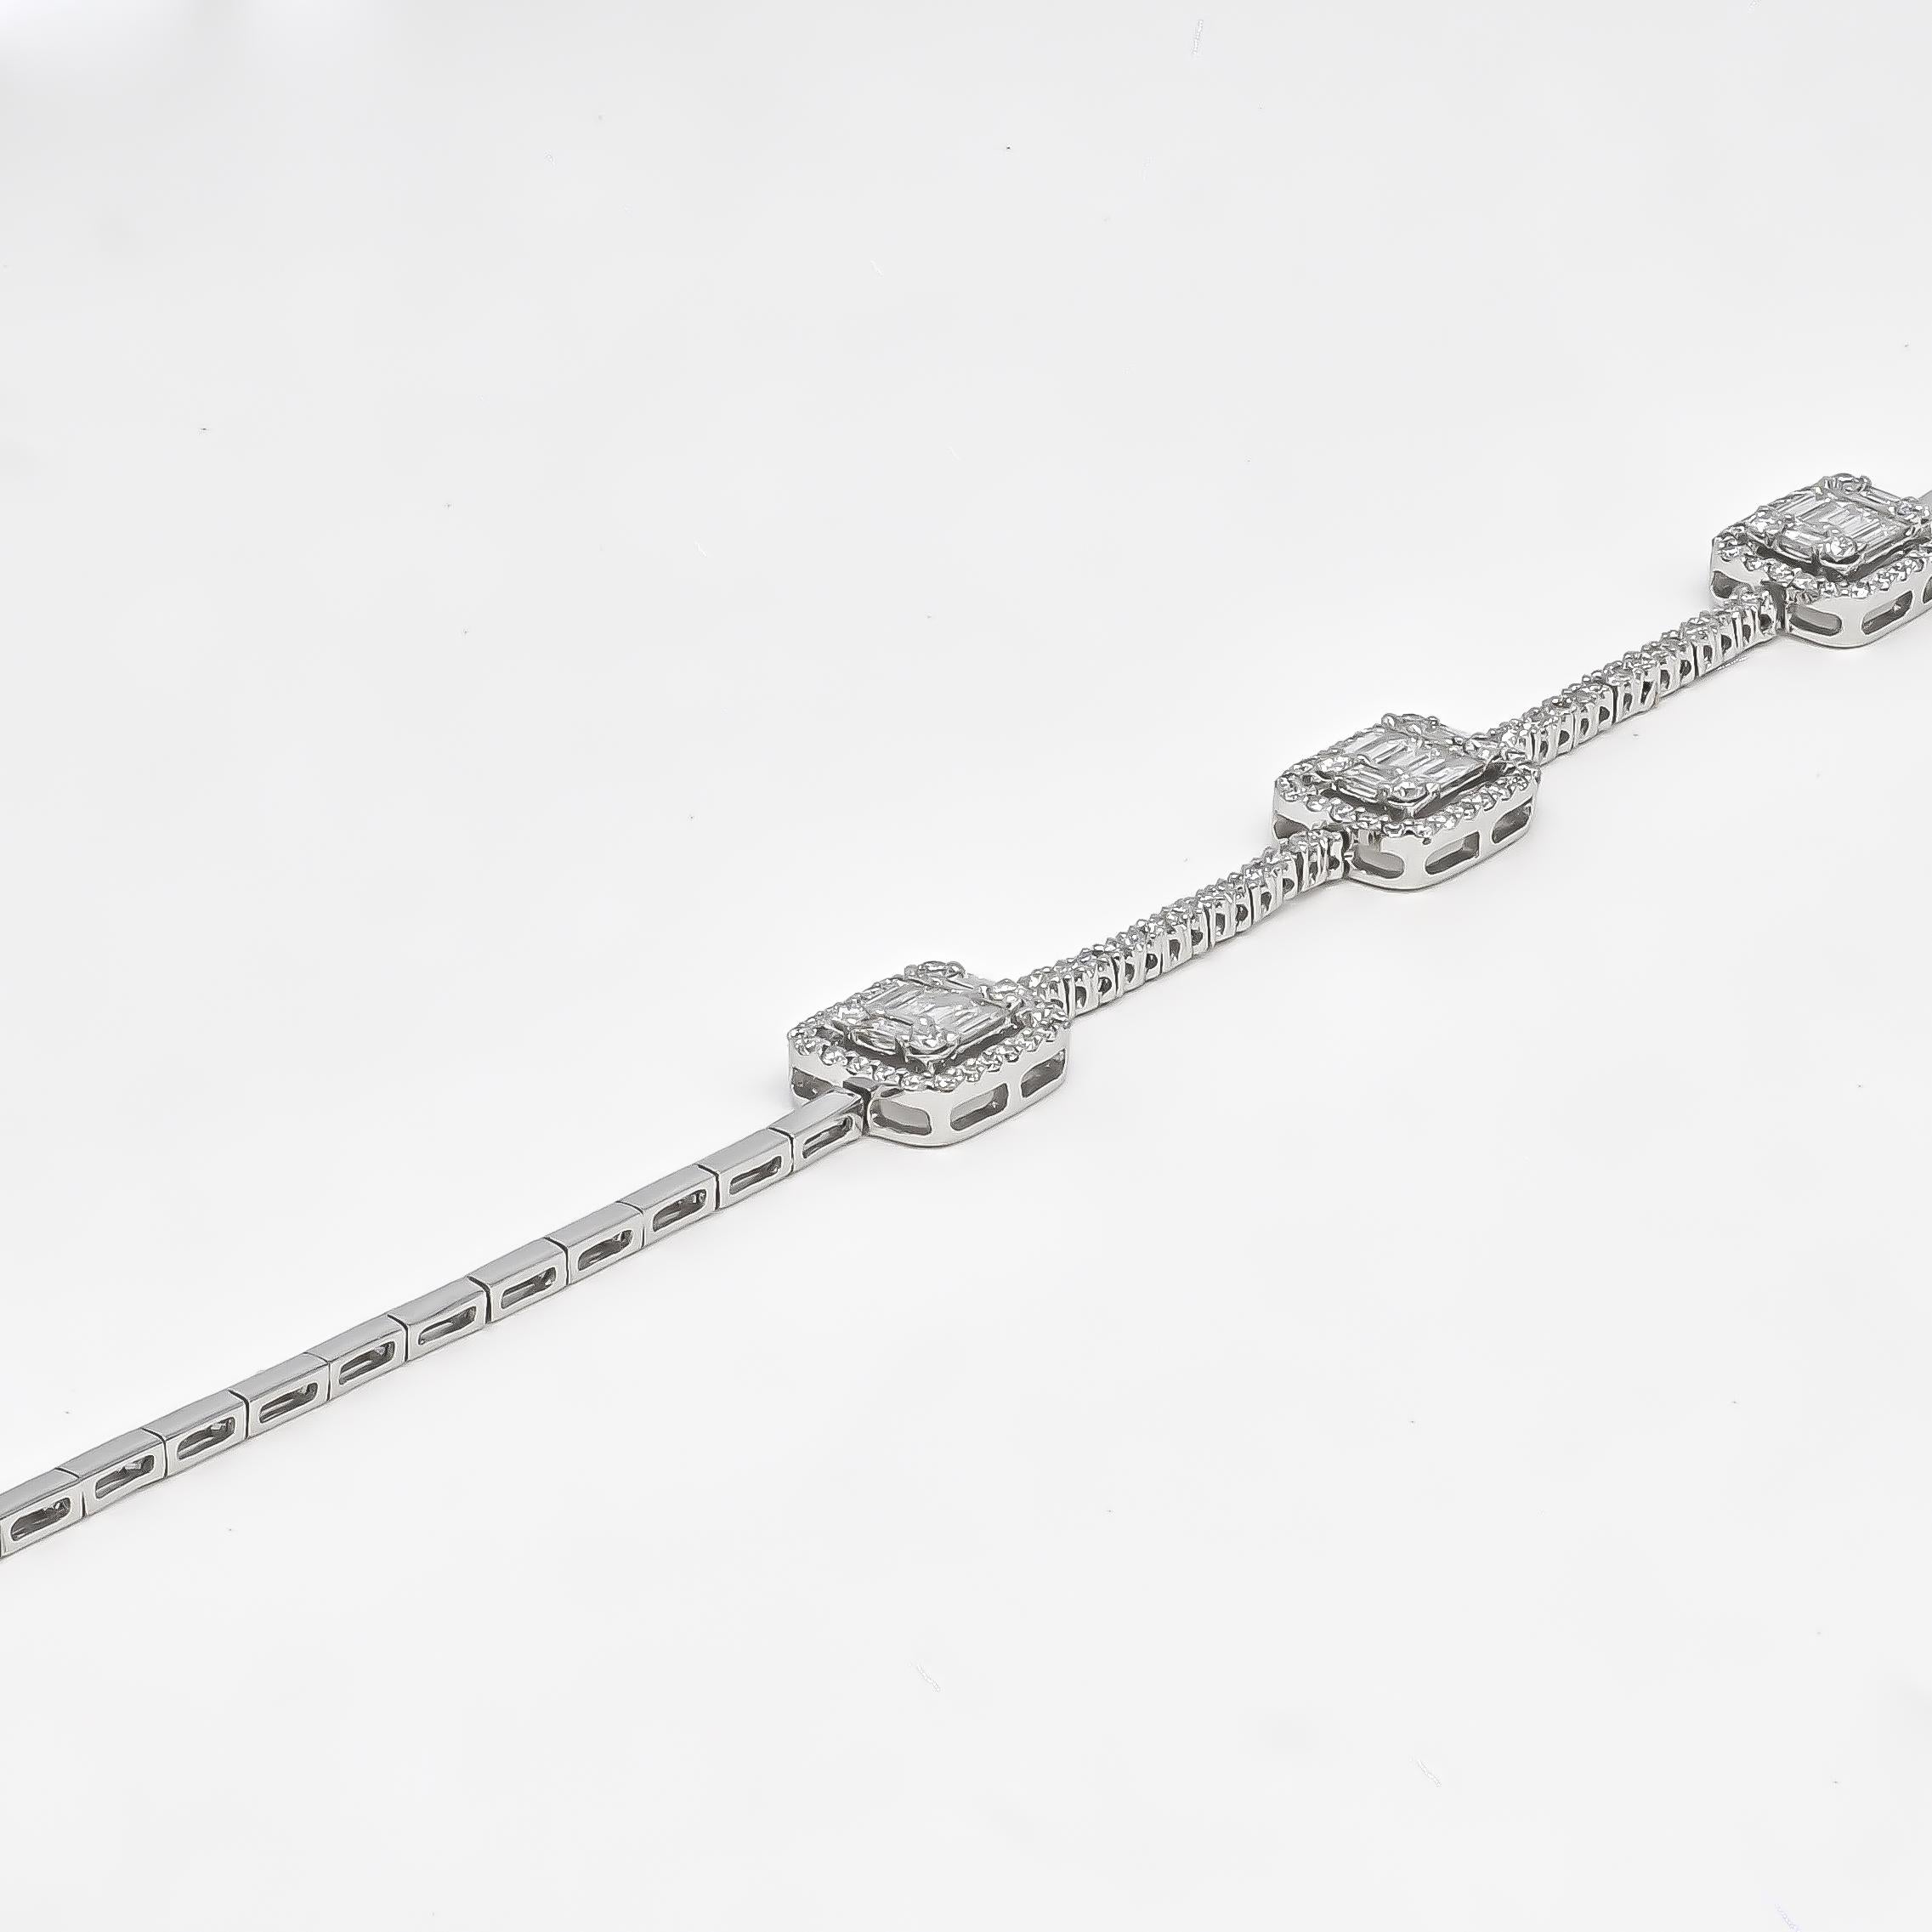 This 18KT white gold diamond tennis bracelet is a true representation of happiness and joy. The sparkling trio of baguette diamonds set in an illusion design is a showstopper and will make you feel radiant every time you wear it. The 18kt white gold